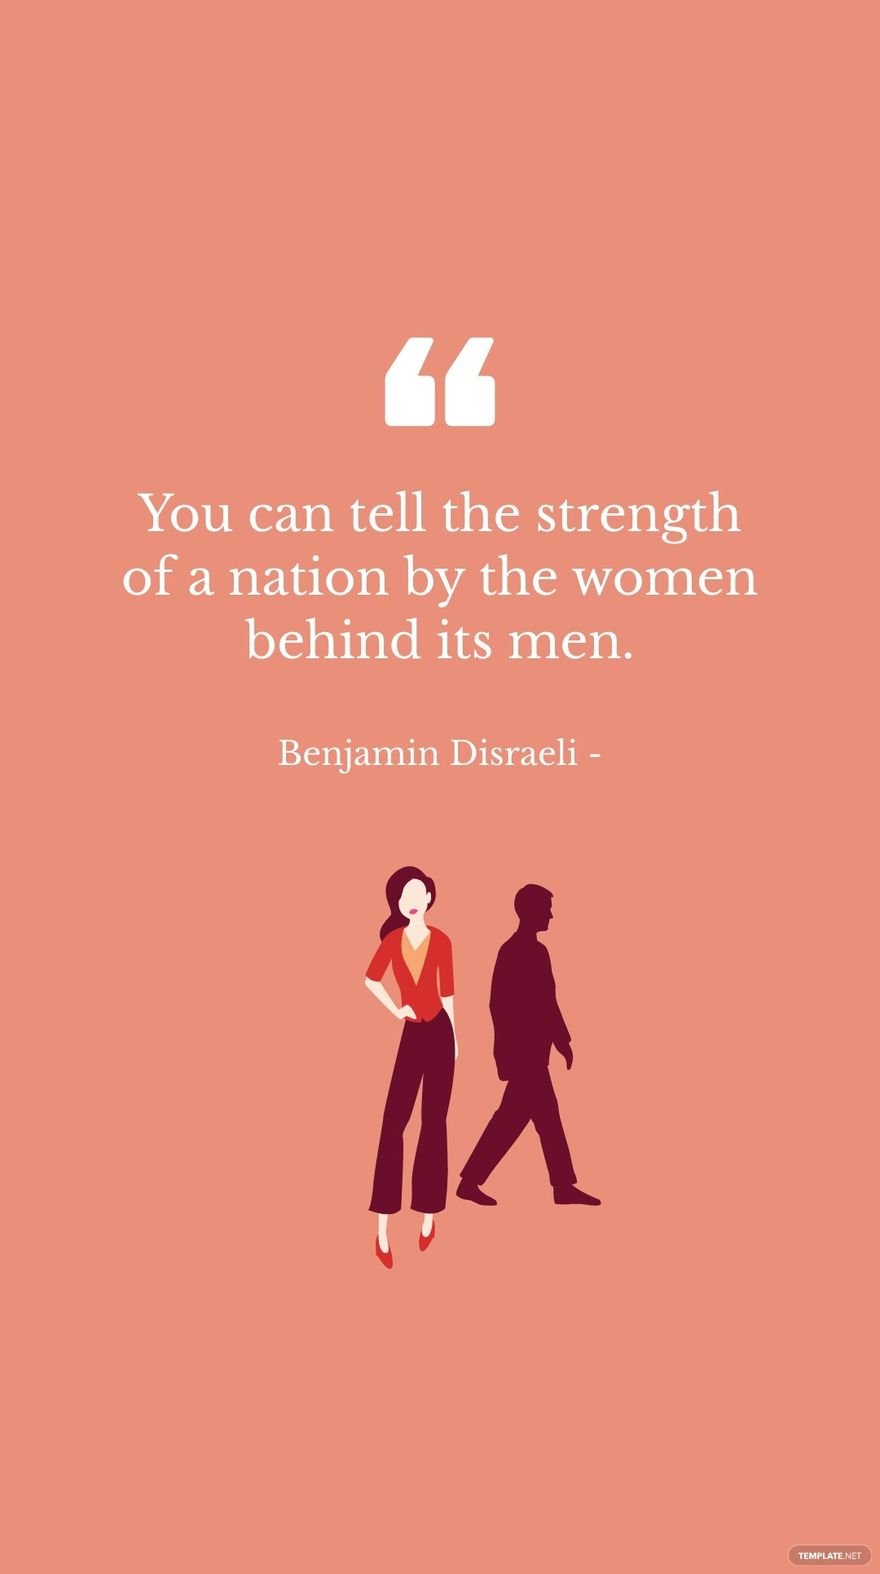 Free Benjamin Disraeli - You can tell the strength of a nation by the women behind its men. in JPG